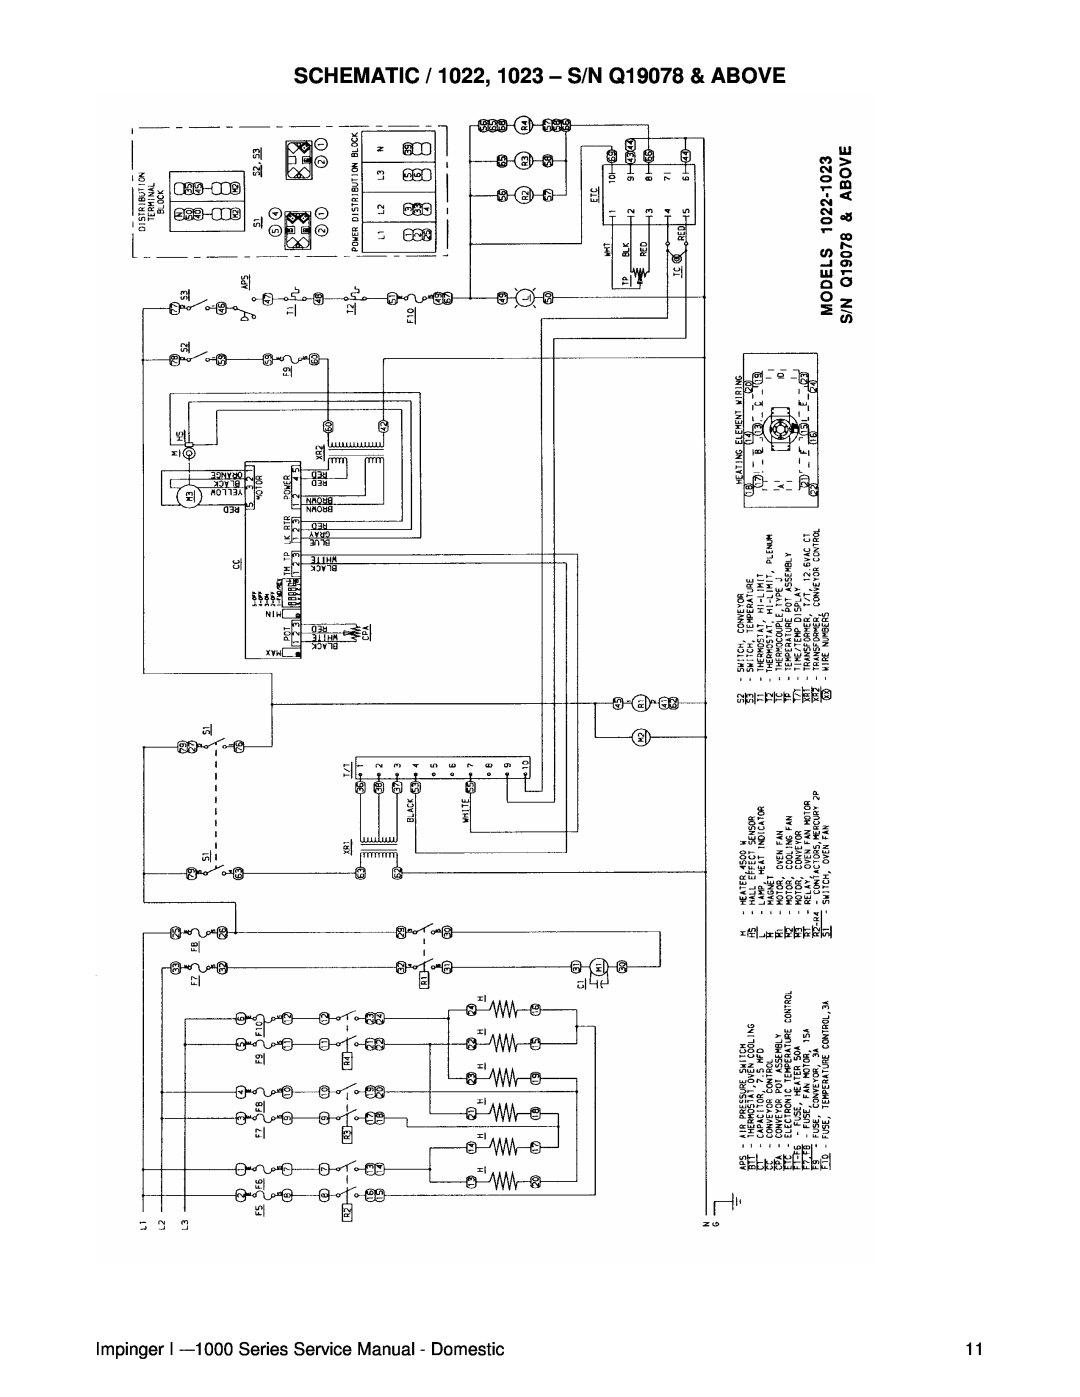 Lincoln 1400, 1200 SCHEMATIC / 1022, 1023 - S/N Q19078 & ABOVE, Impinger I -–1000Series Service Manual - Domestic 